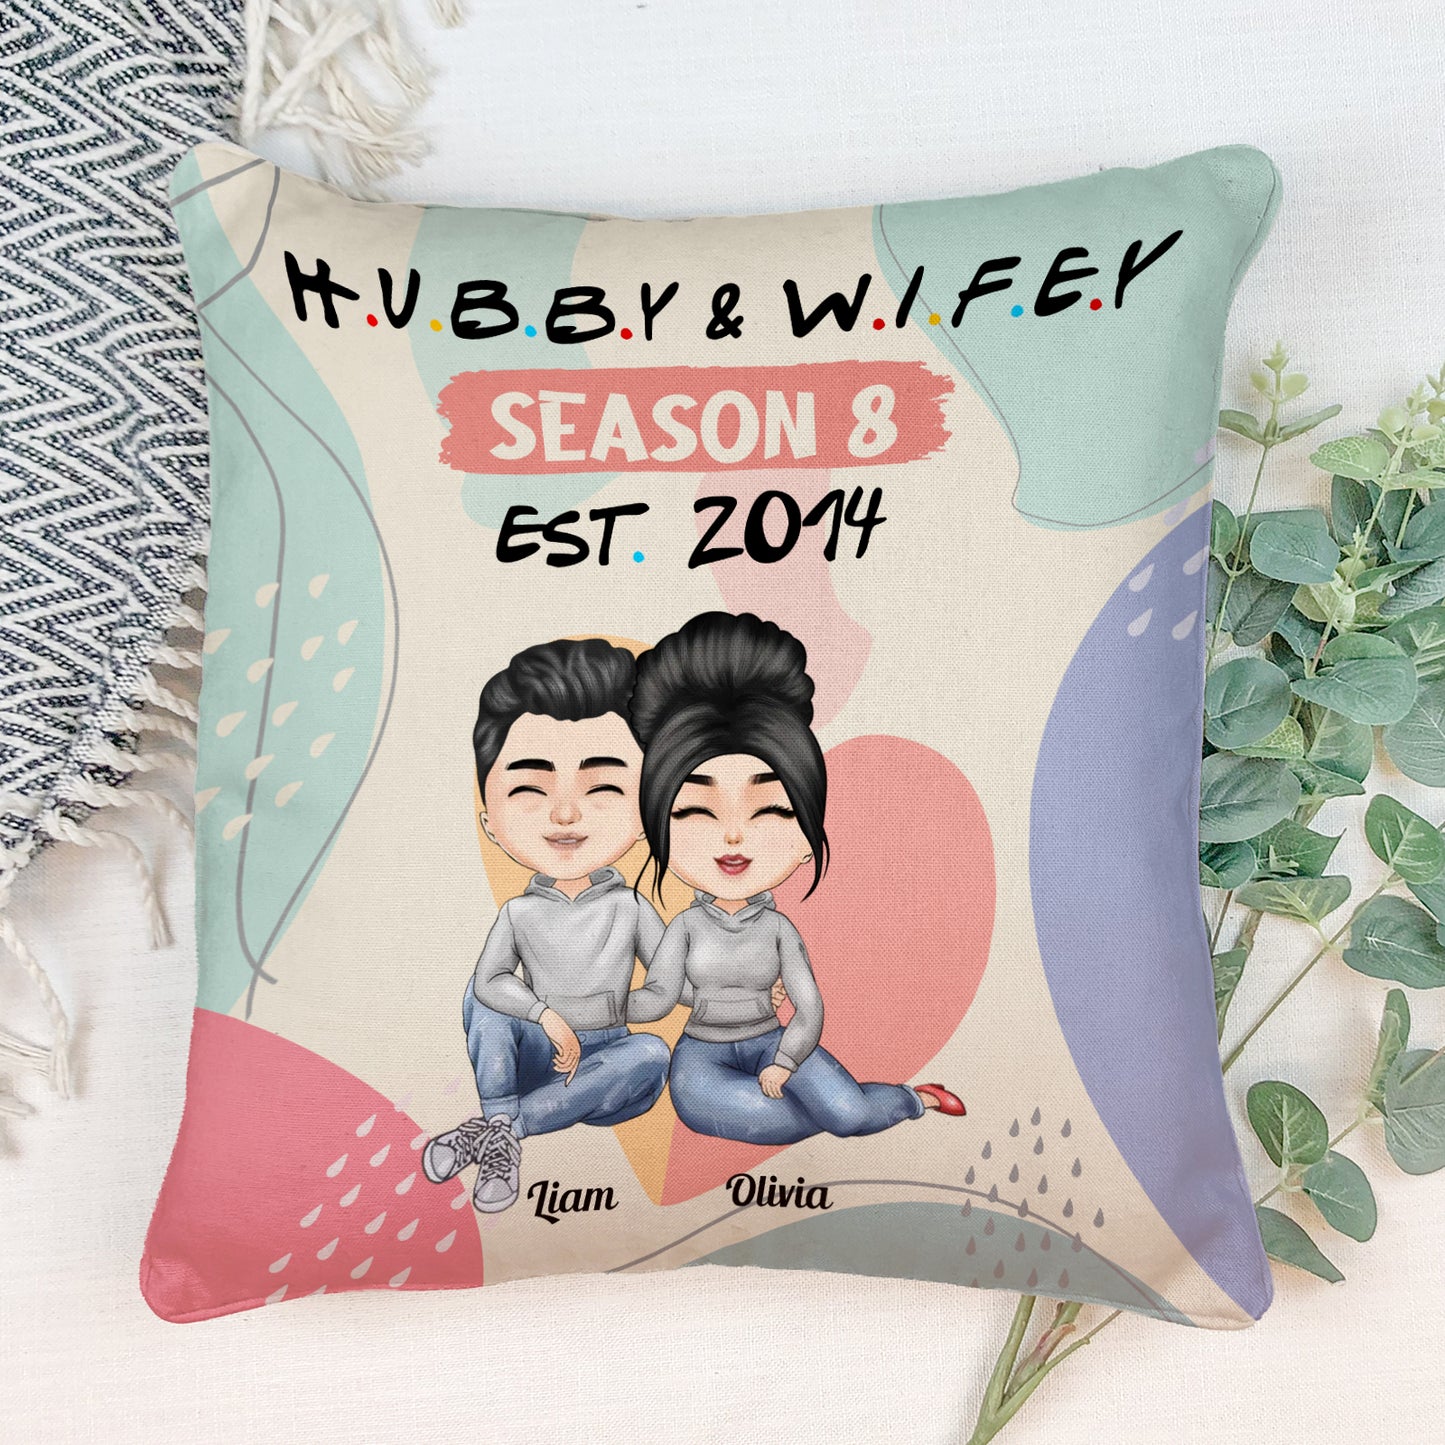 Hubby & Wifey Season 8 - Personalized Pillow (Insert Included) - Birthday Anniversary Gift For Husband, Wife - Gift From Daughters, Sons For Parents